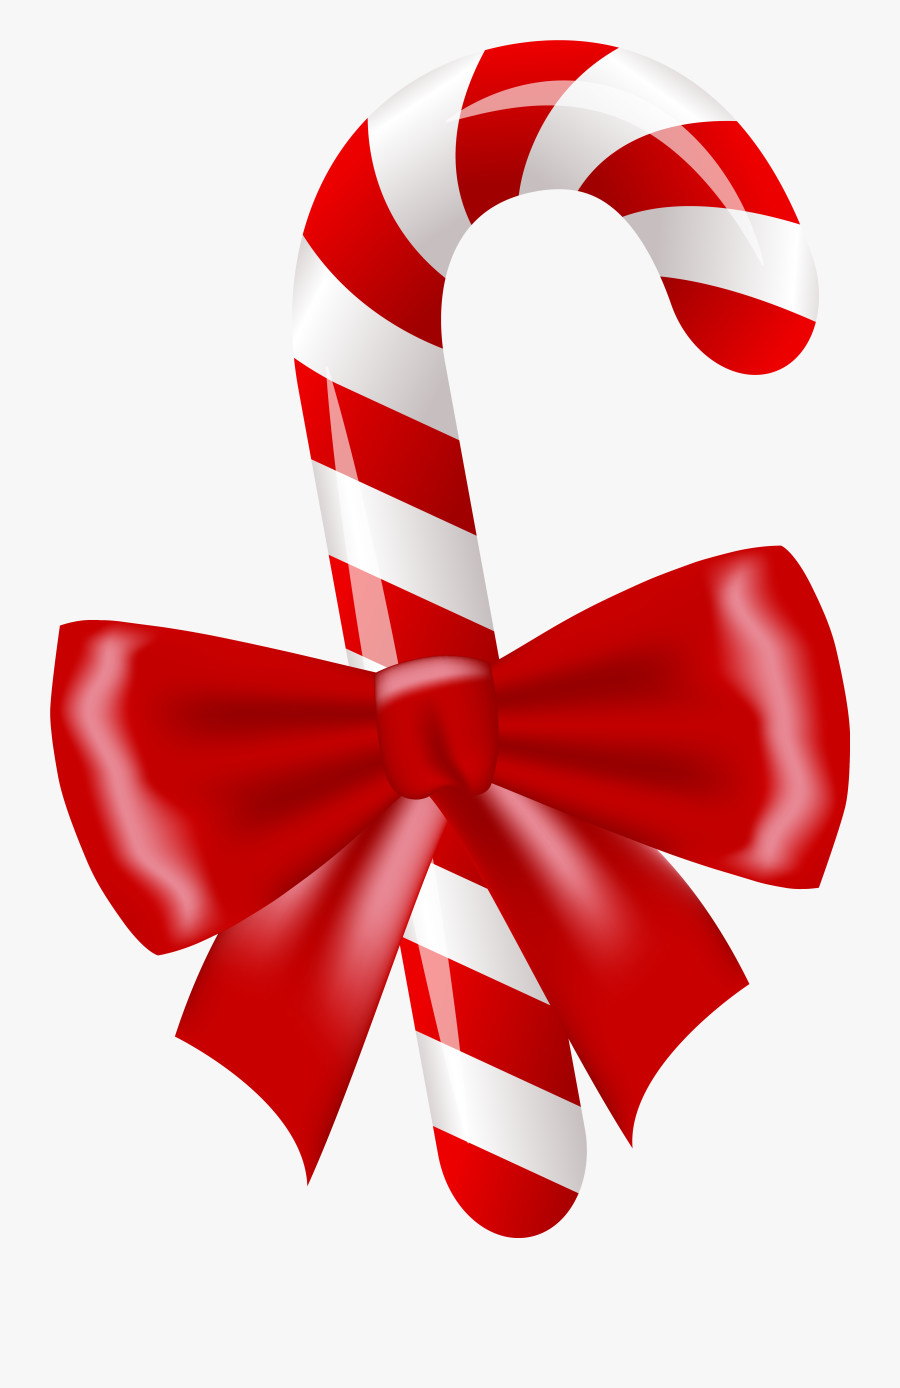 Candy Cane Free On - Christmas Candy Cane Png, Transparent Clipart